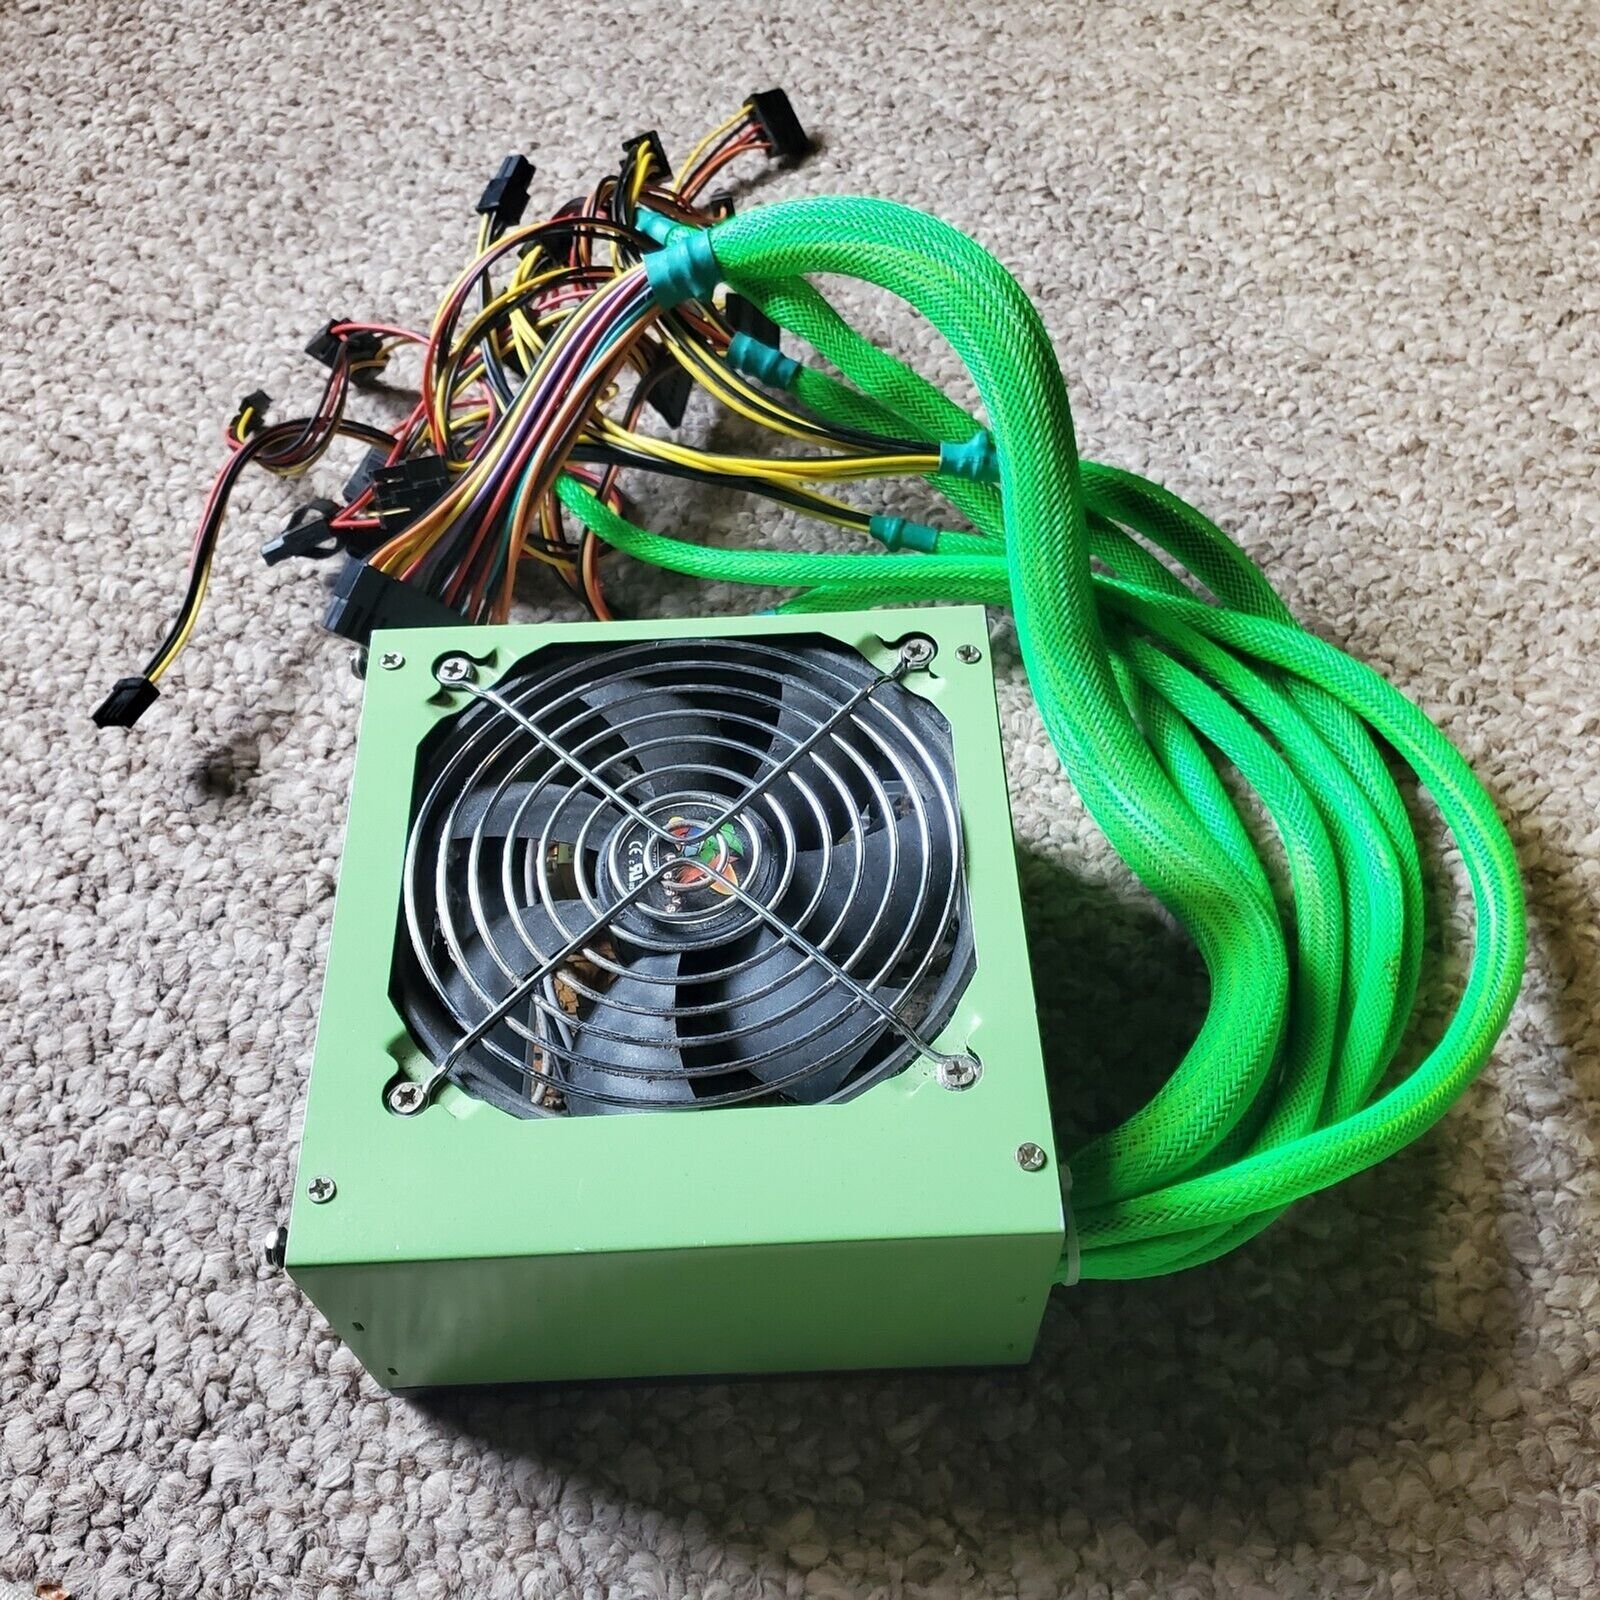 LOGISYS Computer Power Supply PS650U12 650 W ATX12V Neon Green Chassis & Wires